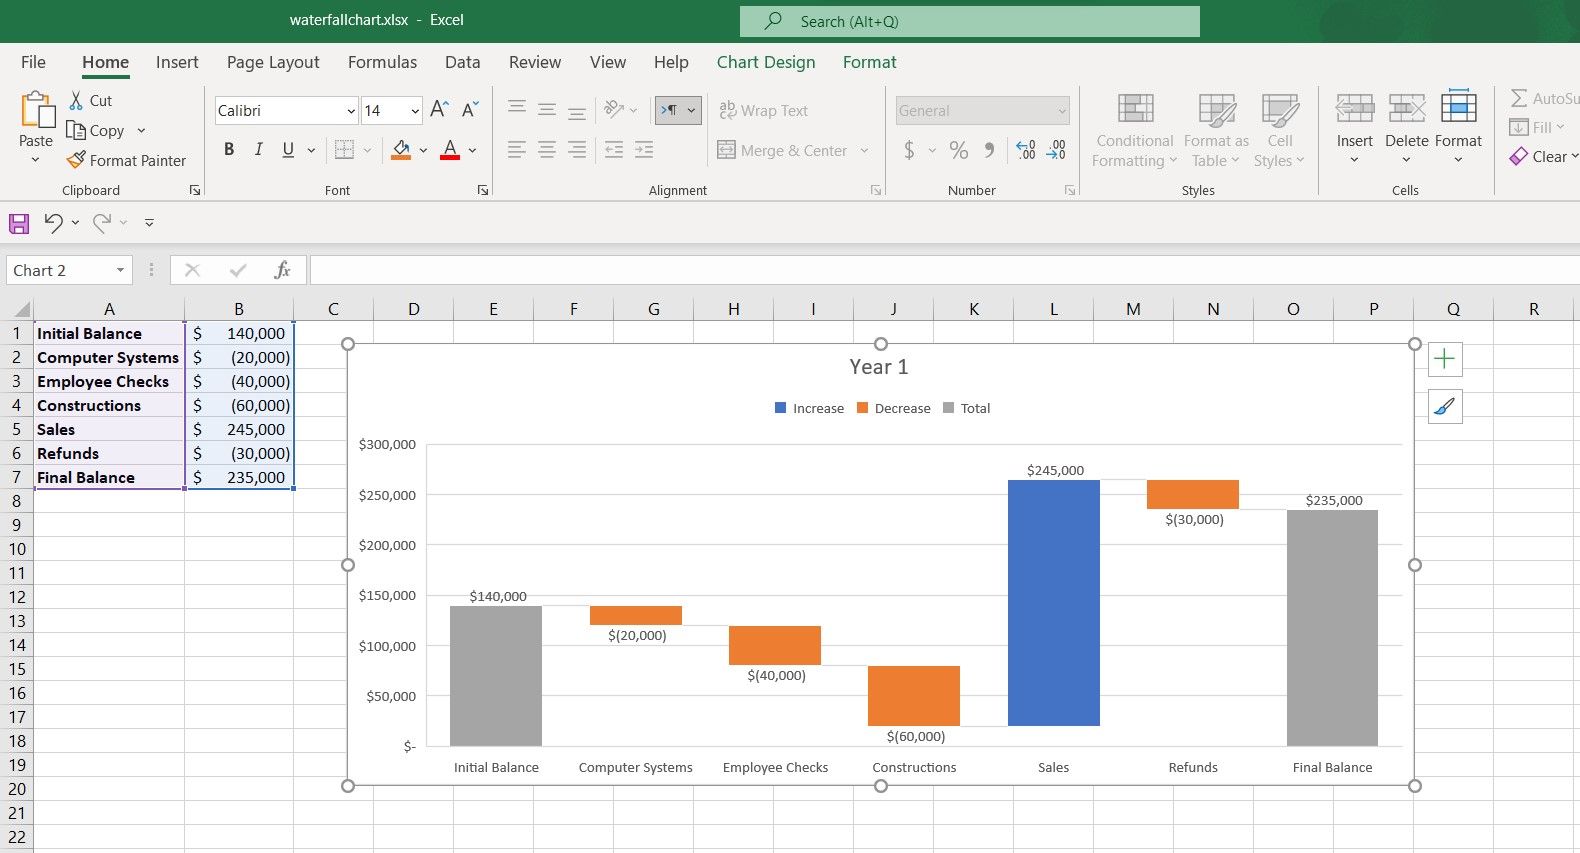 Waterfall chart in Excel.